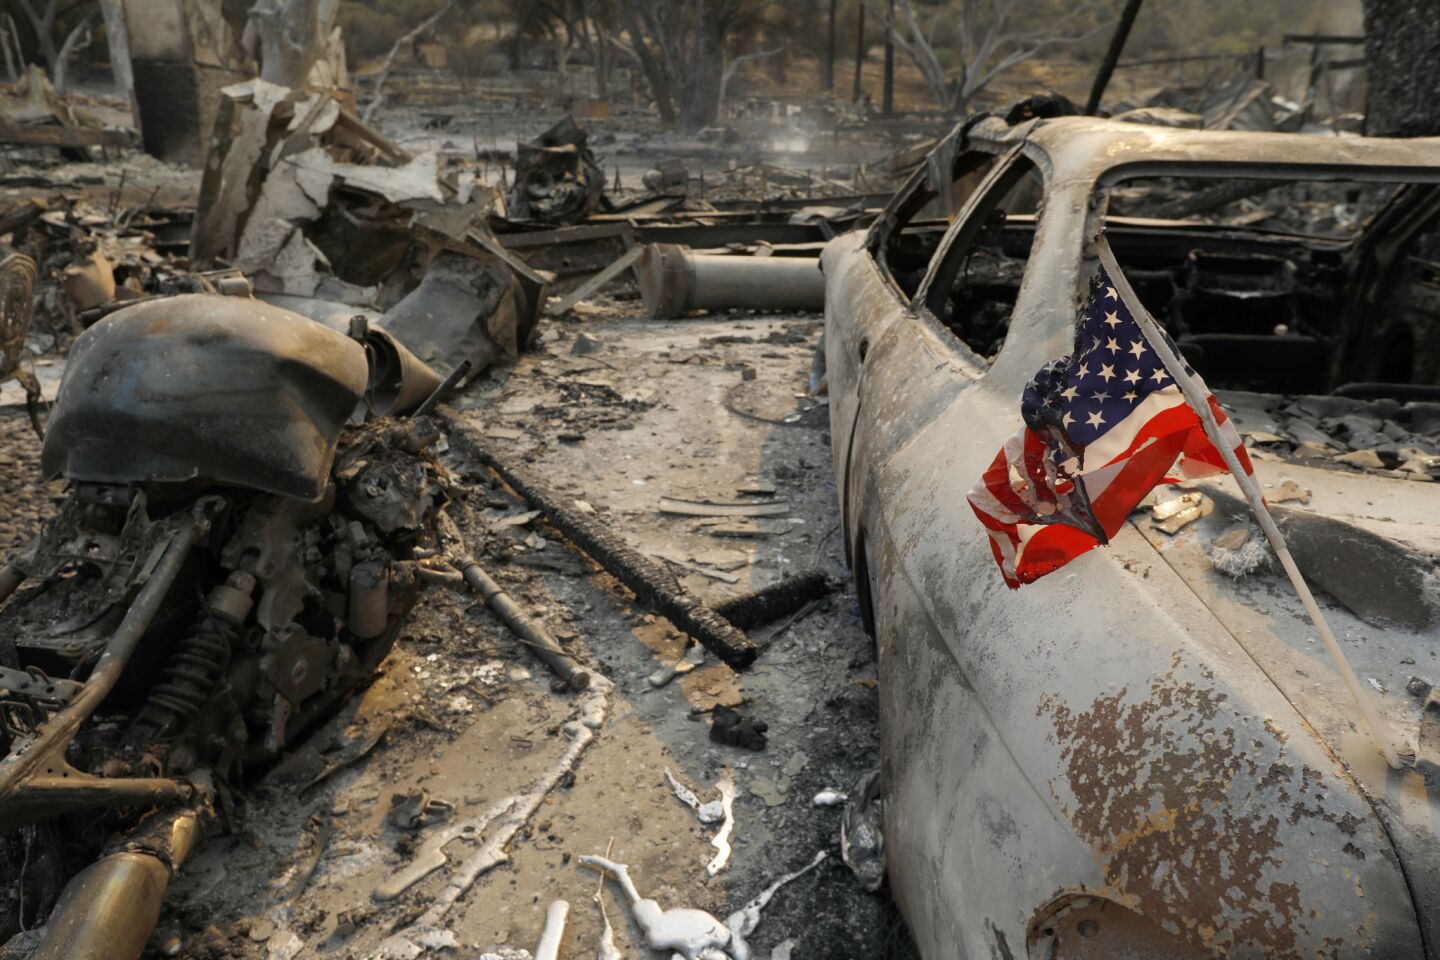 An American flag is melted on a burned-out car on property in a mobile home park in Westlake Village.